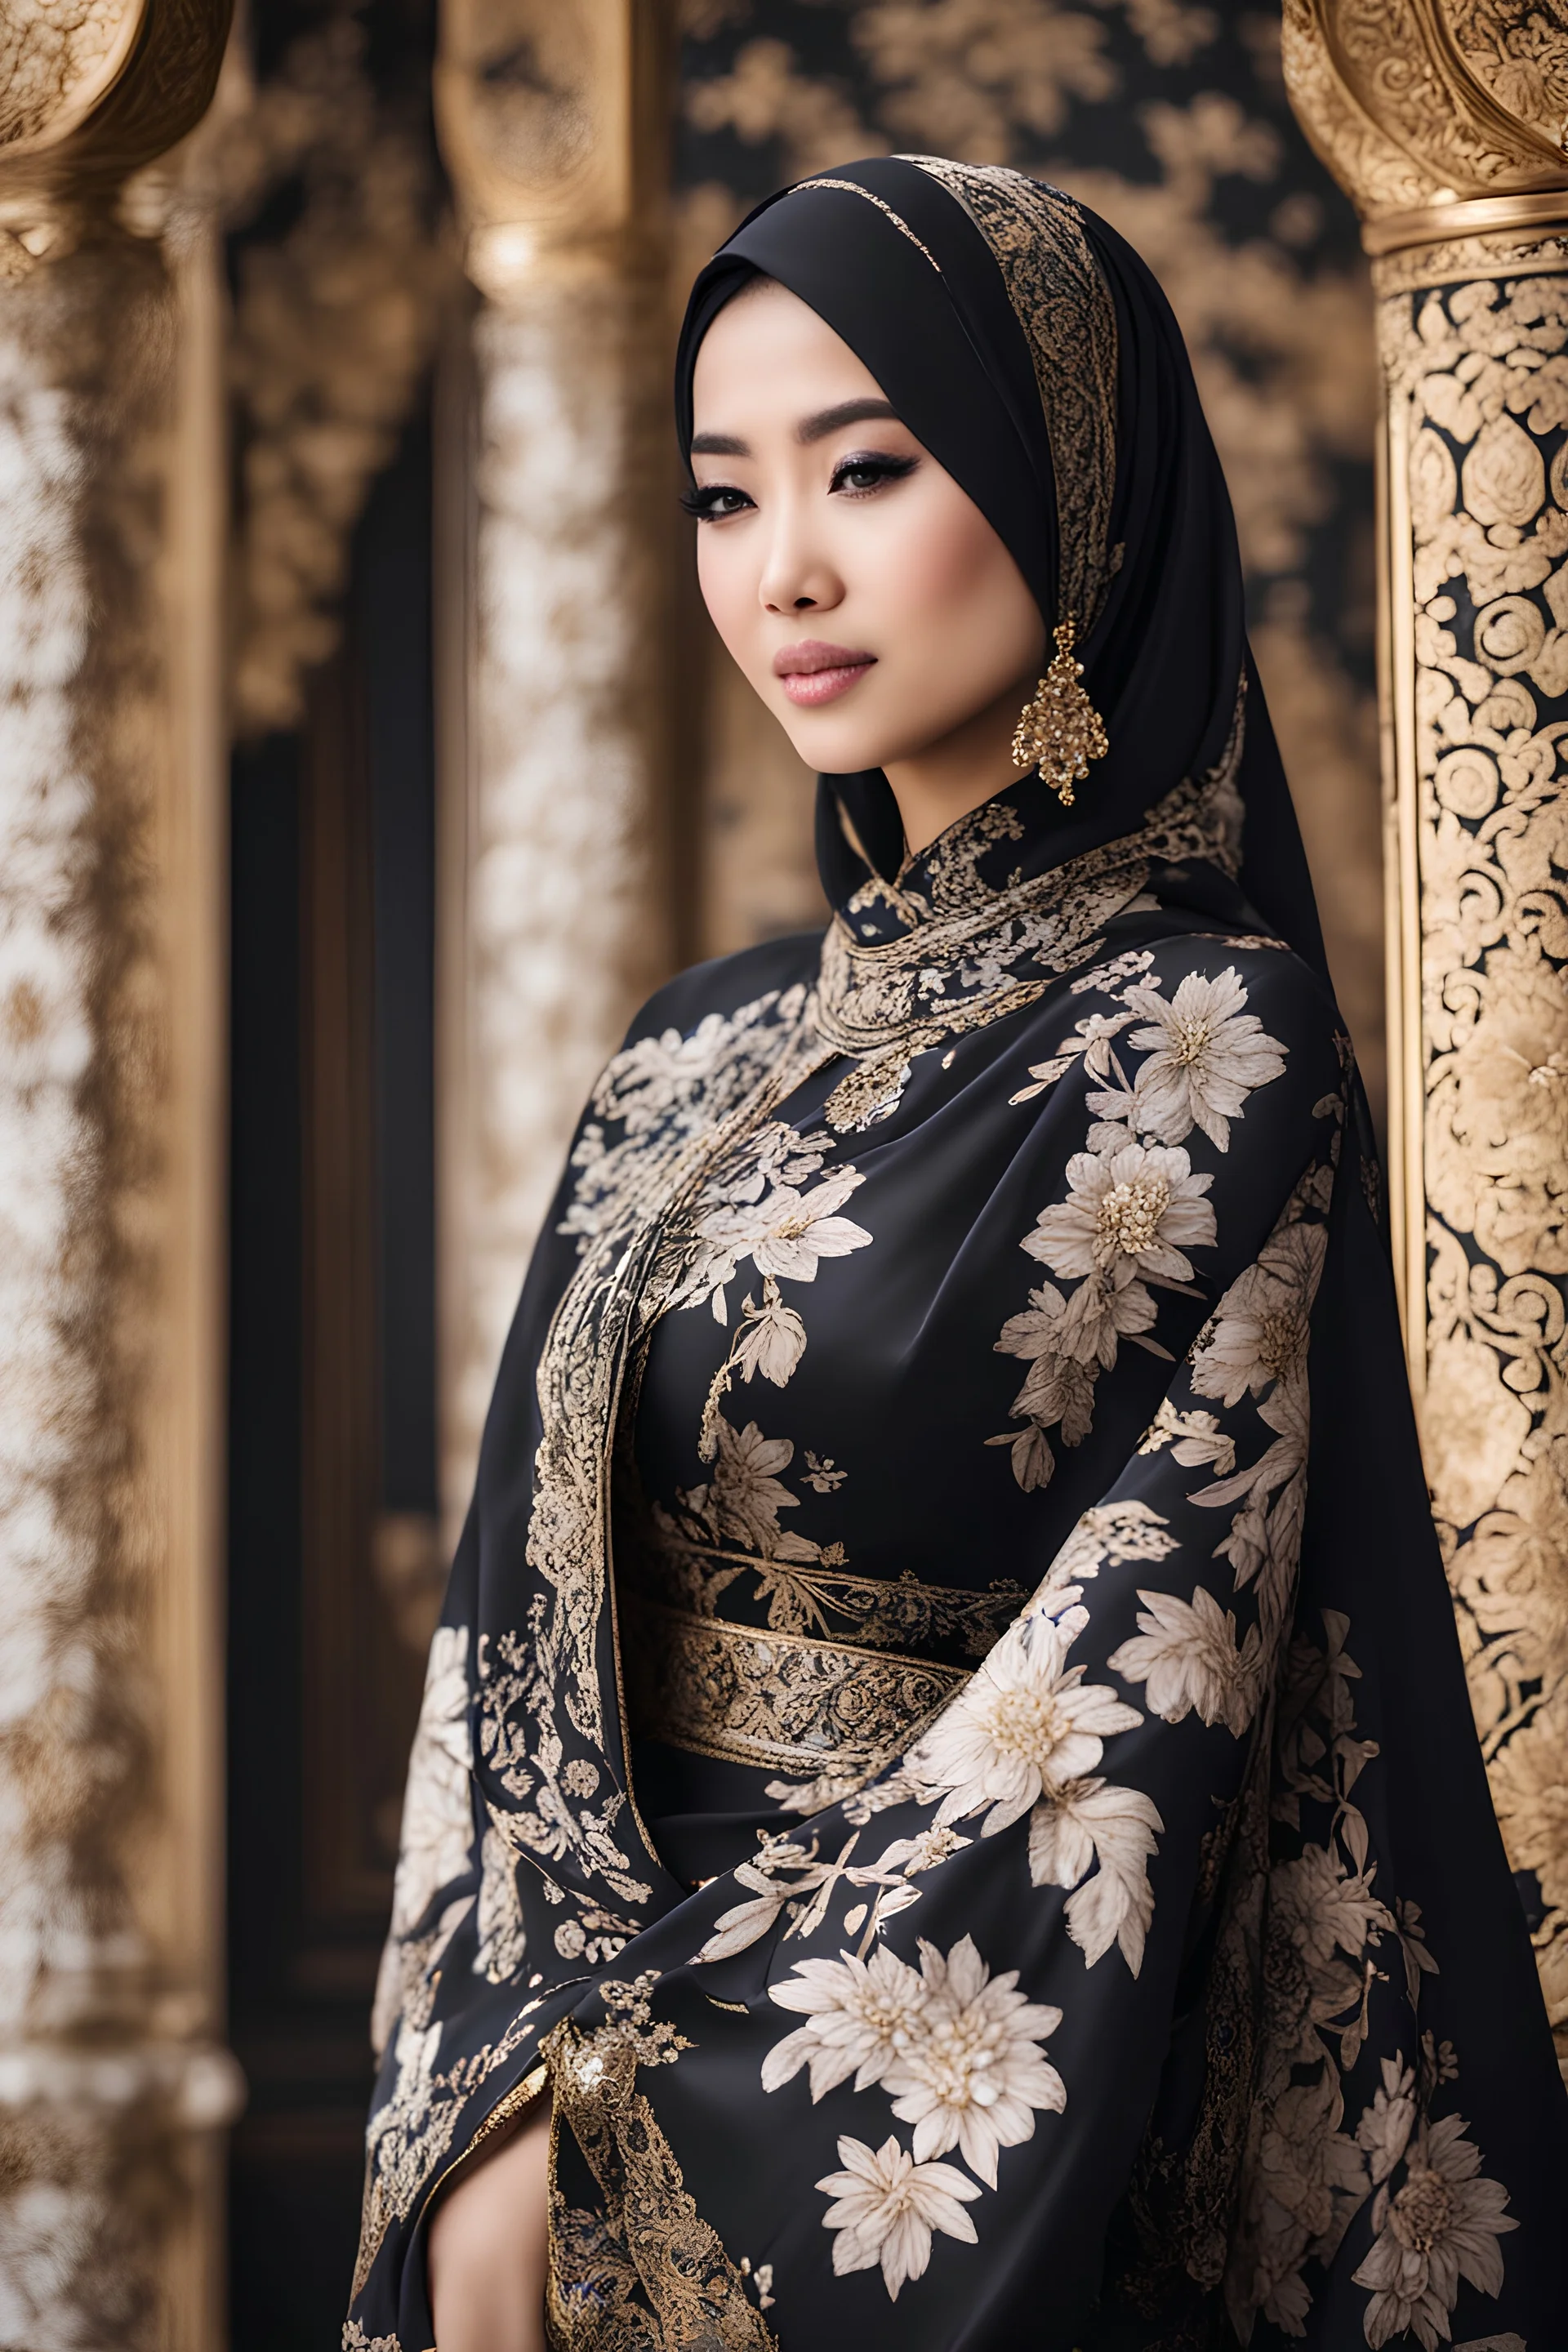 Gorgeous Realistic Photography Super model Asian as Beautiful hijab girl dressing Batik pattern flowers gown luxury black and jewelry,luxury palace background, close-up portrait